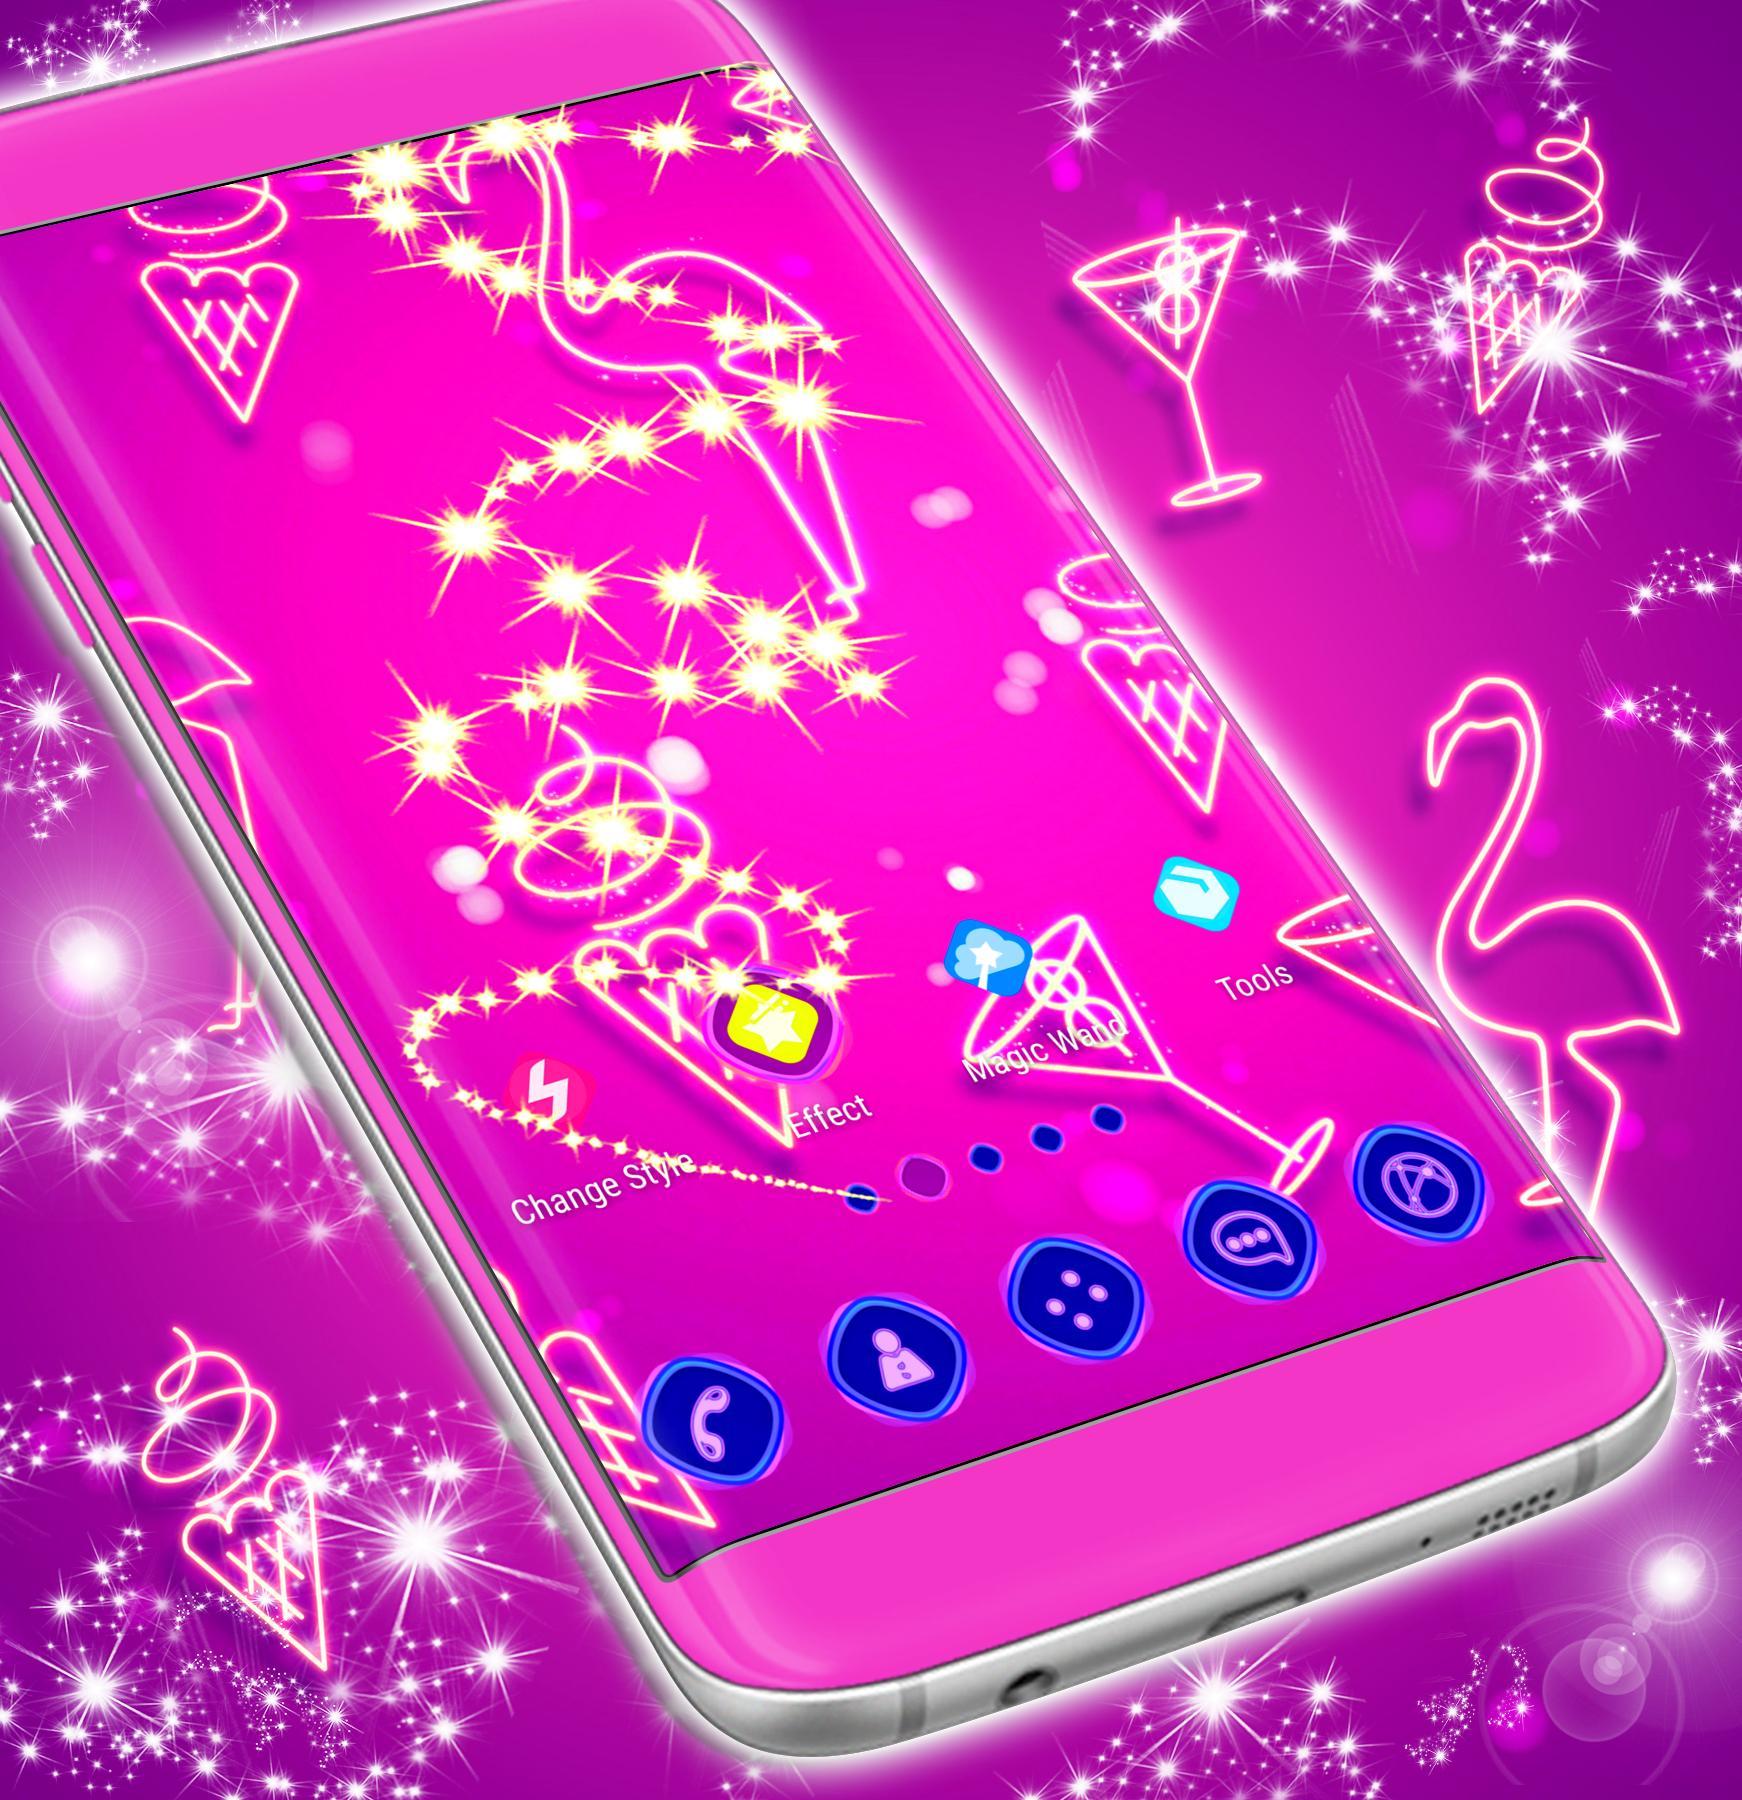  Cute  Launchers  for Android  APK Download